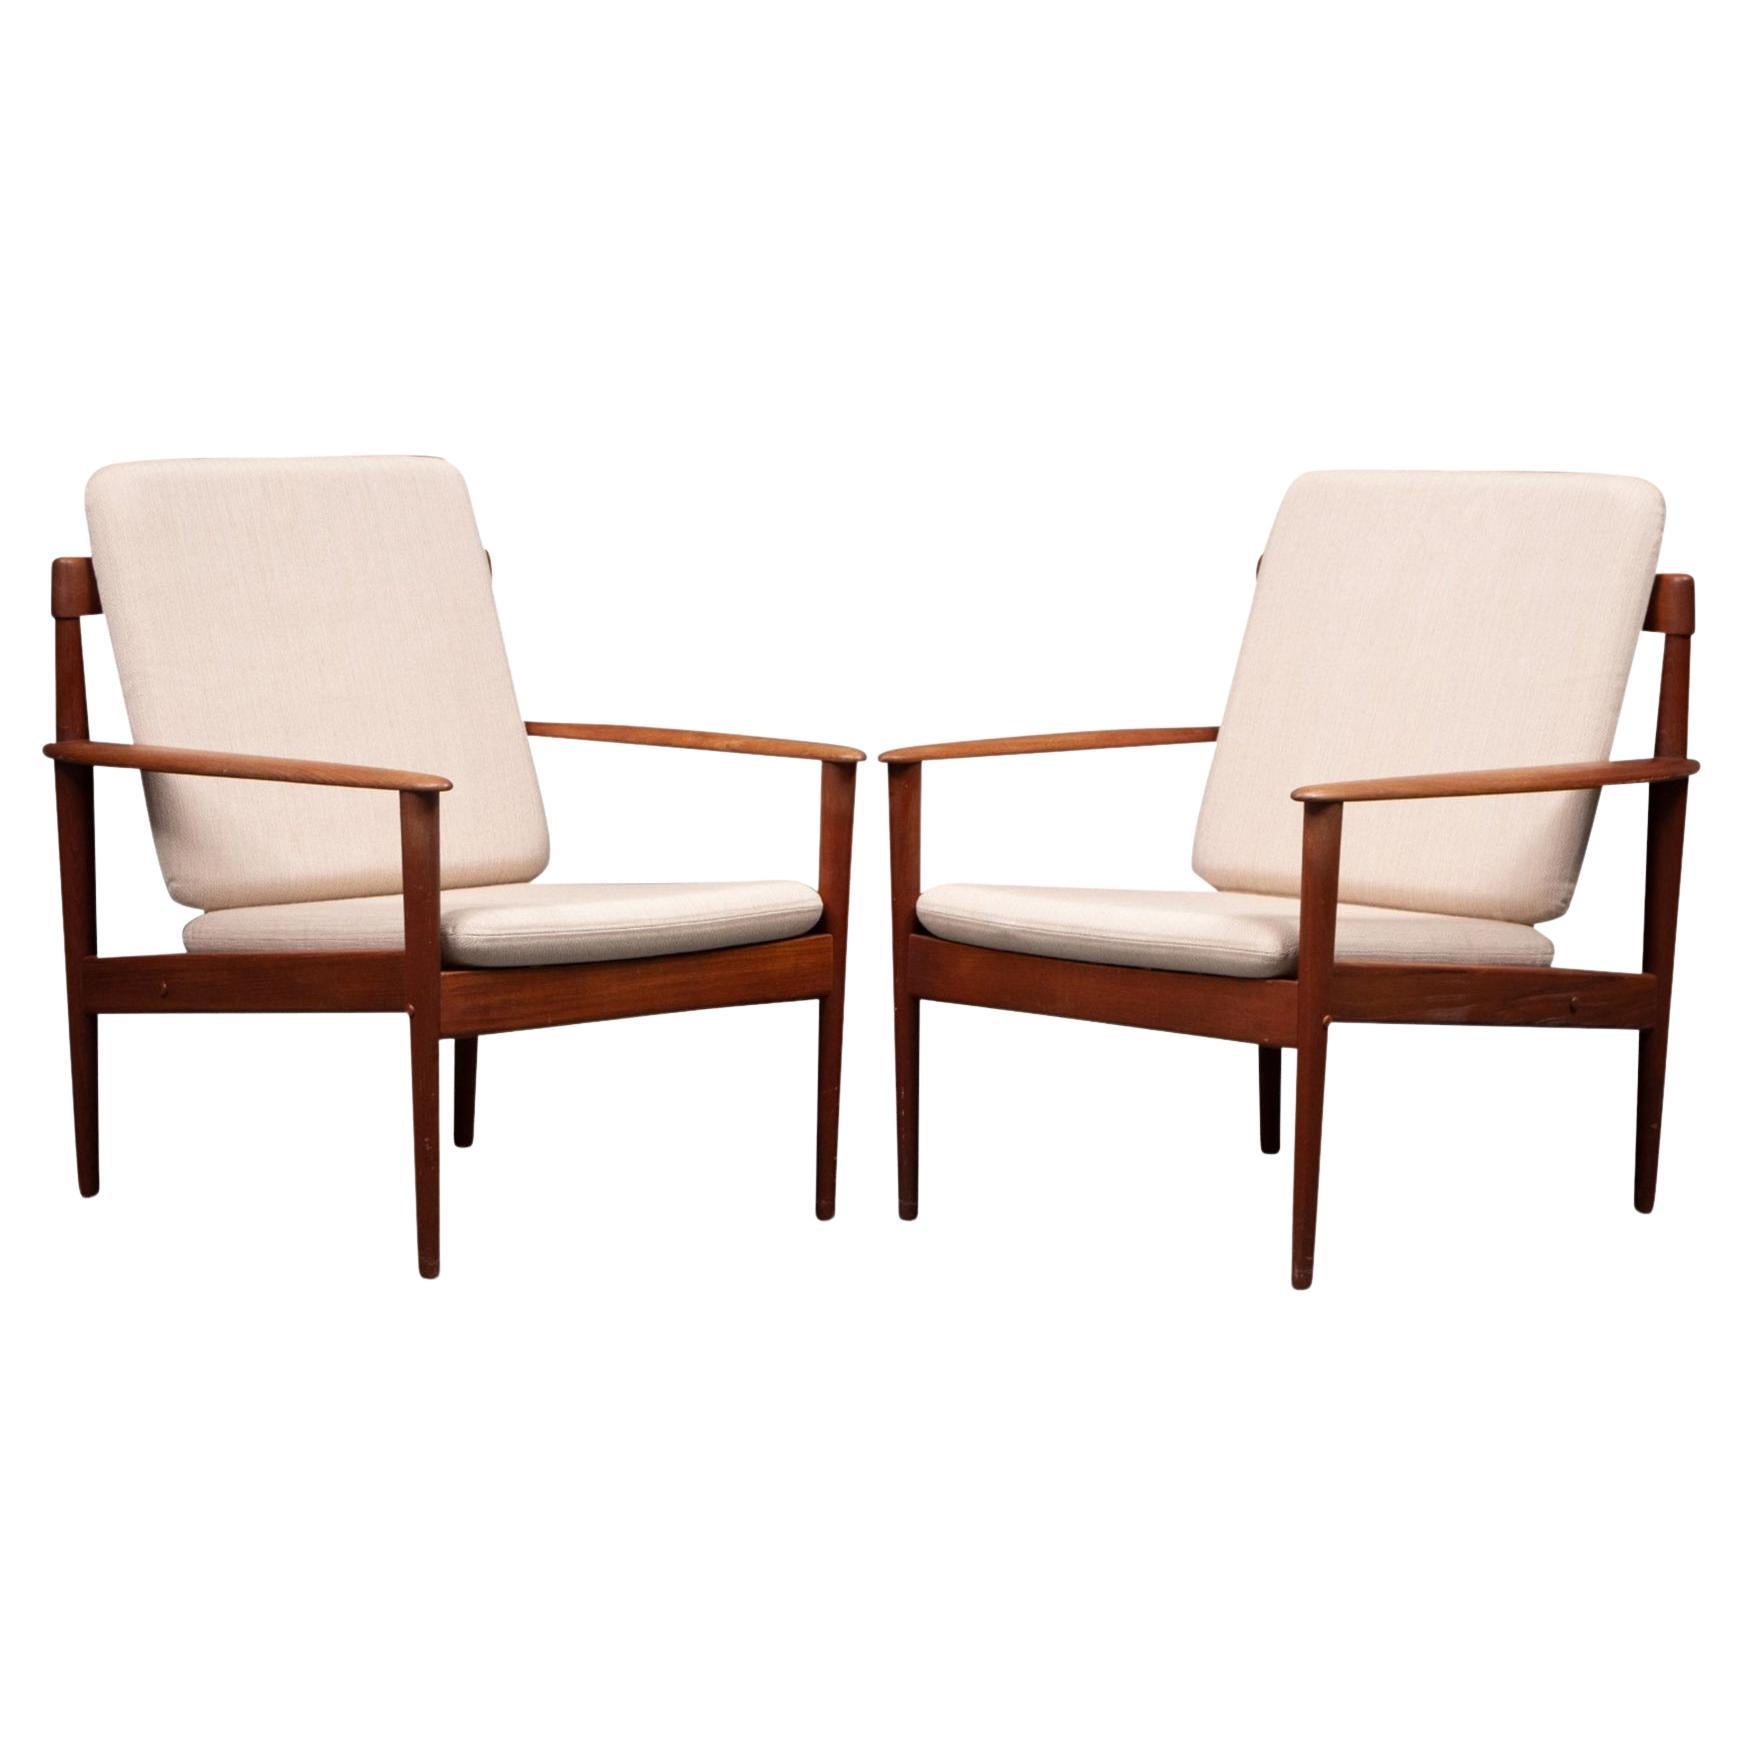 Pair of Grete Jalk Lounge Chairs in Teak